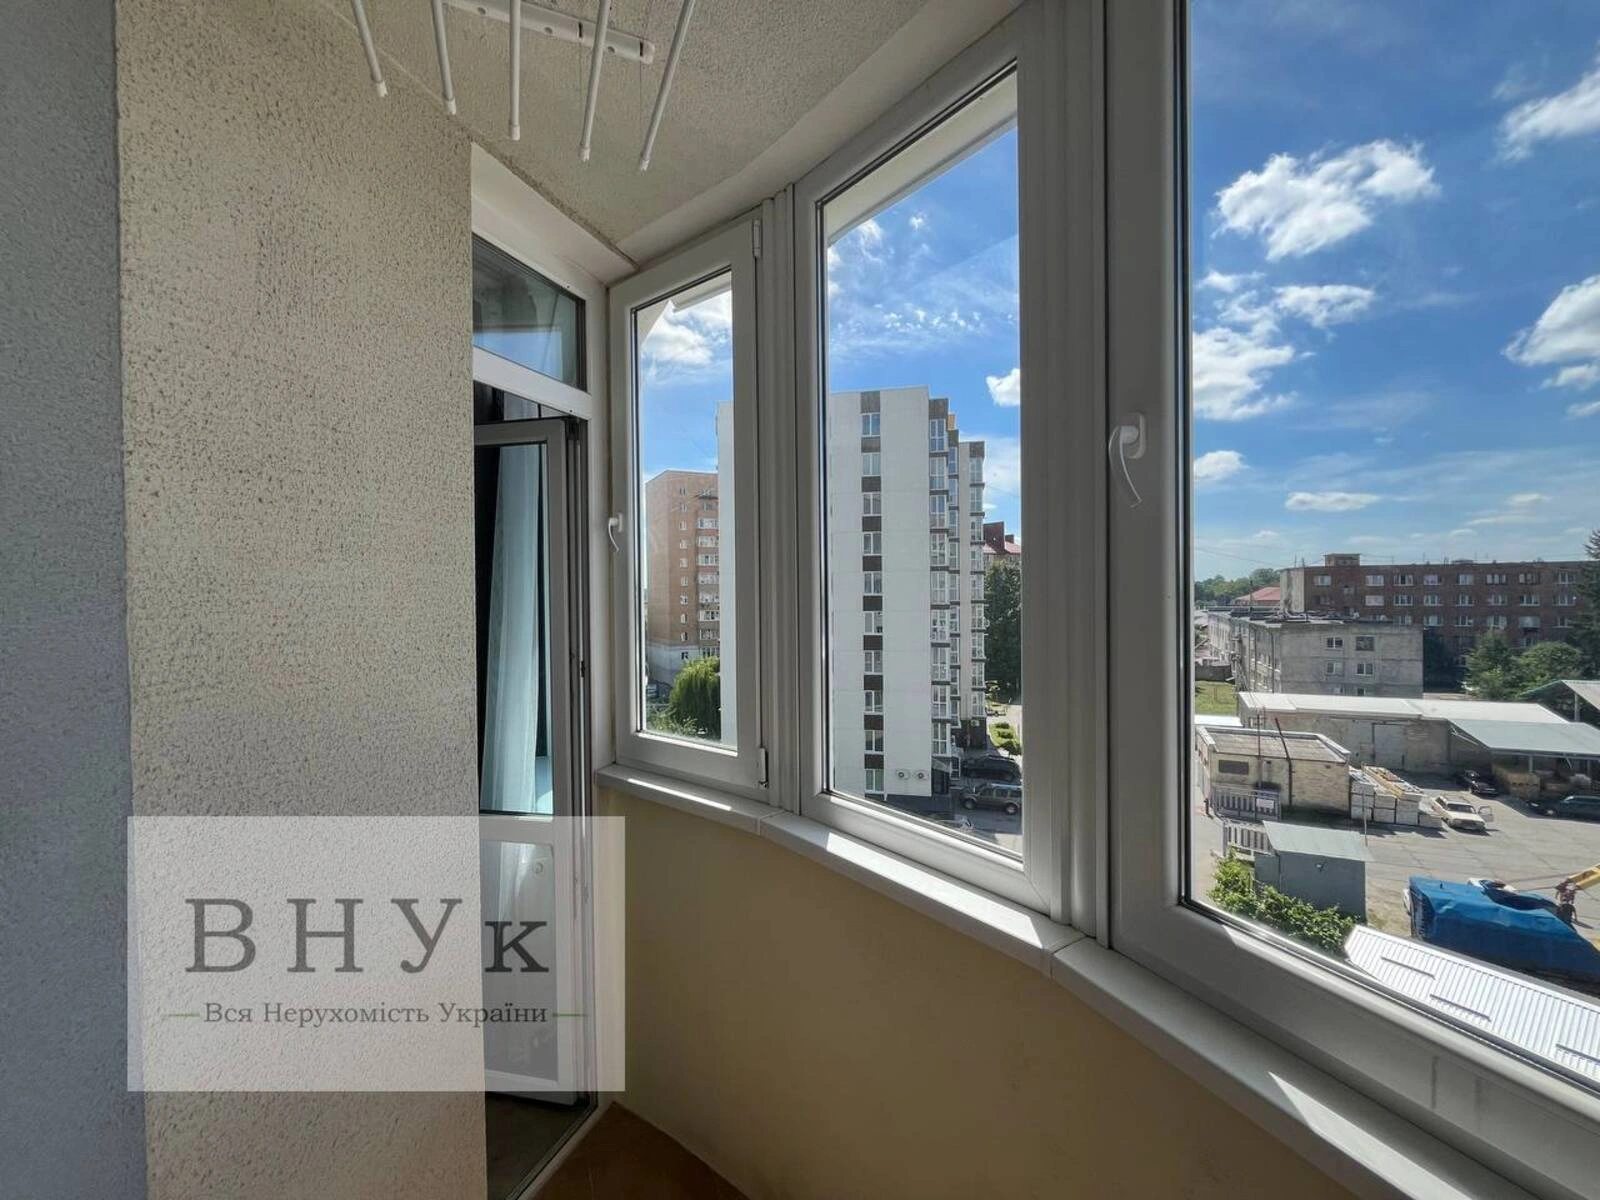 Apartments for sale. 2 rooms, 72 m², 7th floor/9 floors. Troleybusna vul., Ternopil. 